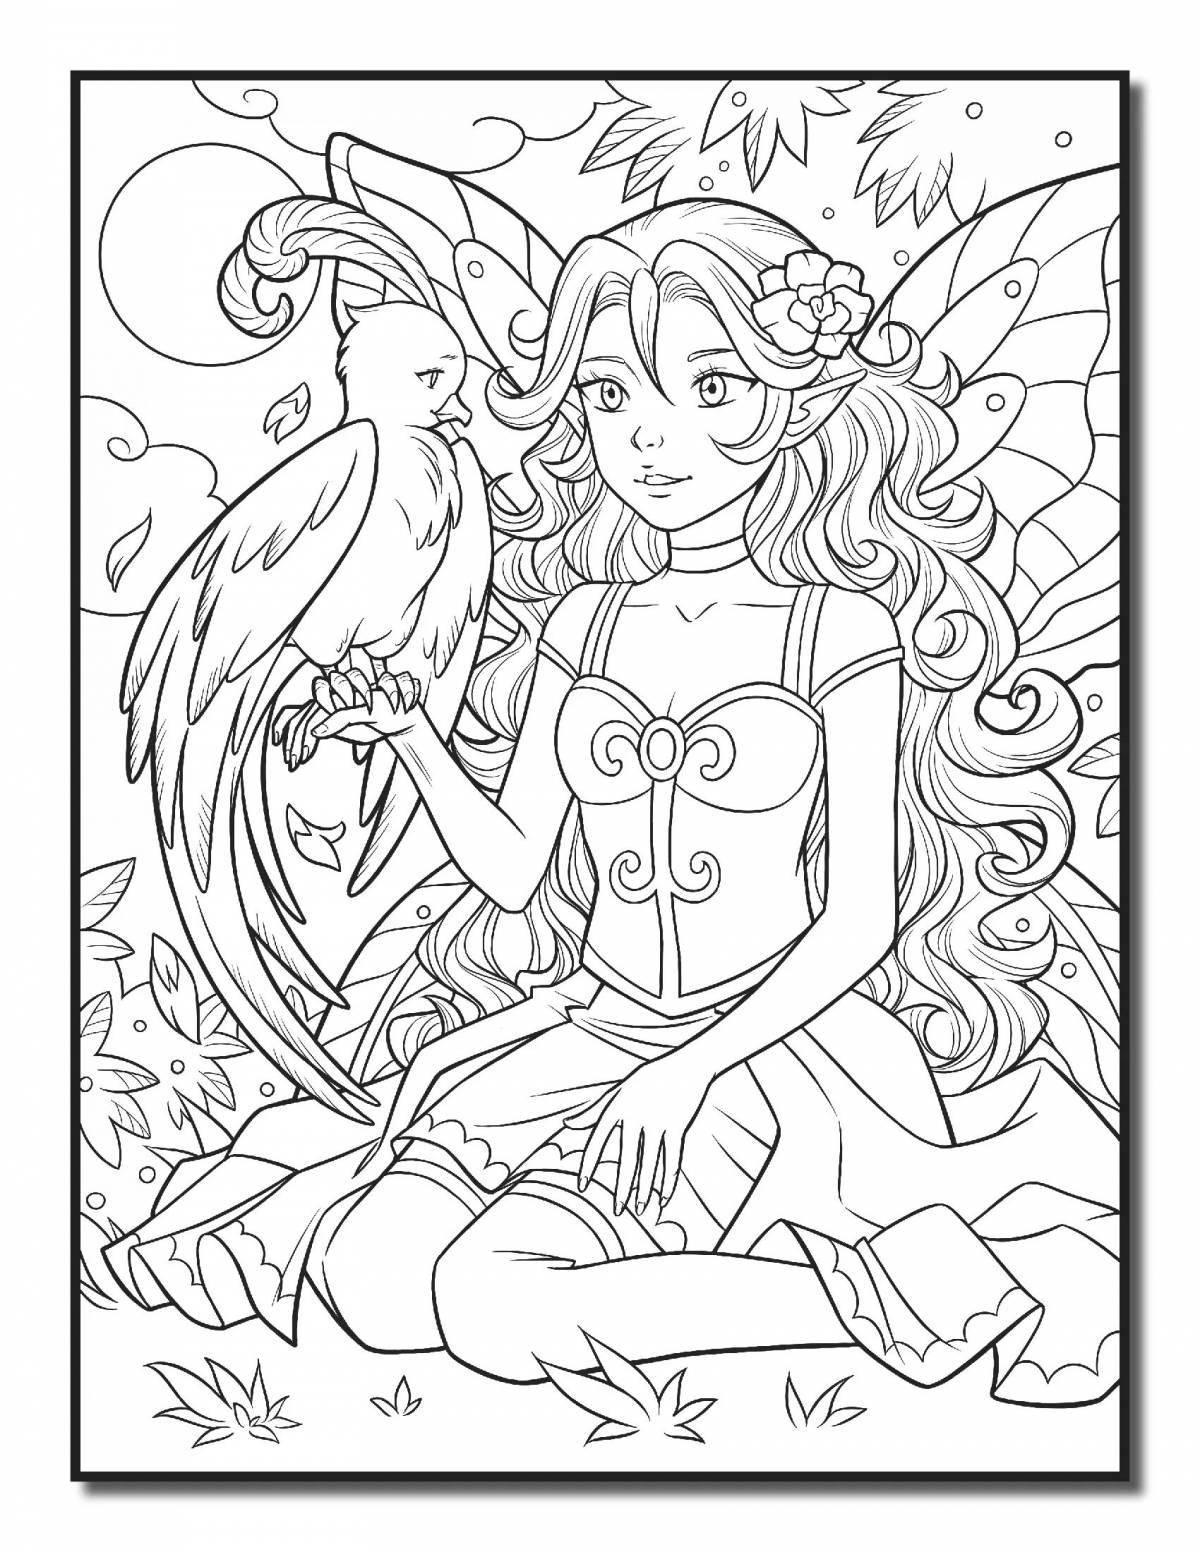 Great lego elves coloring pages